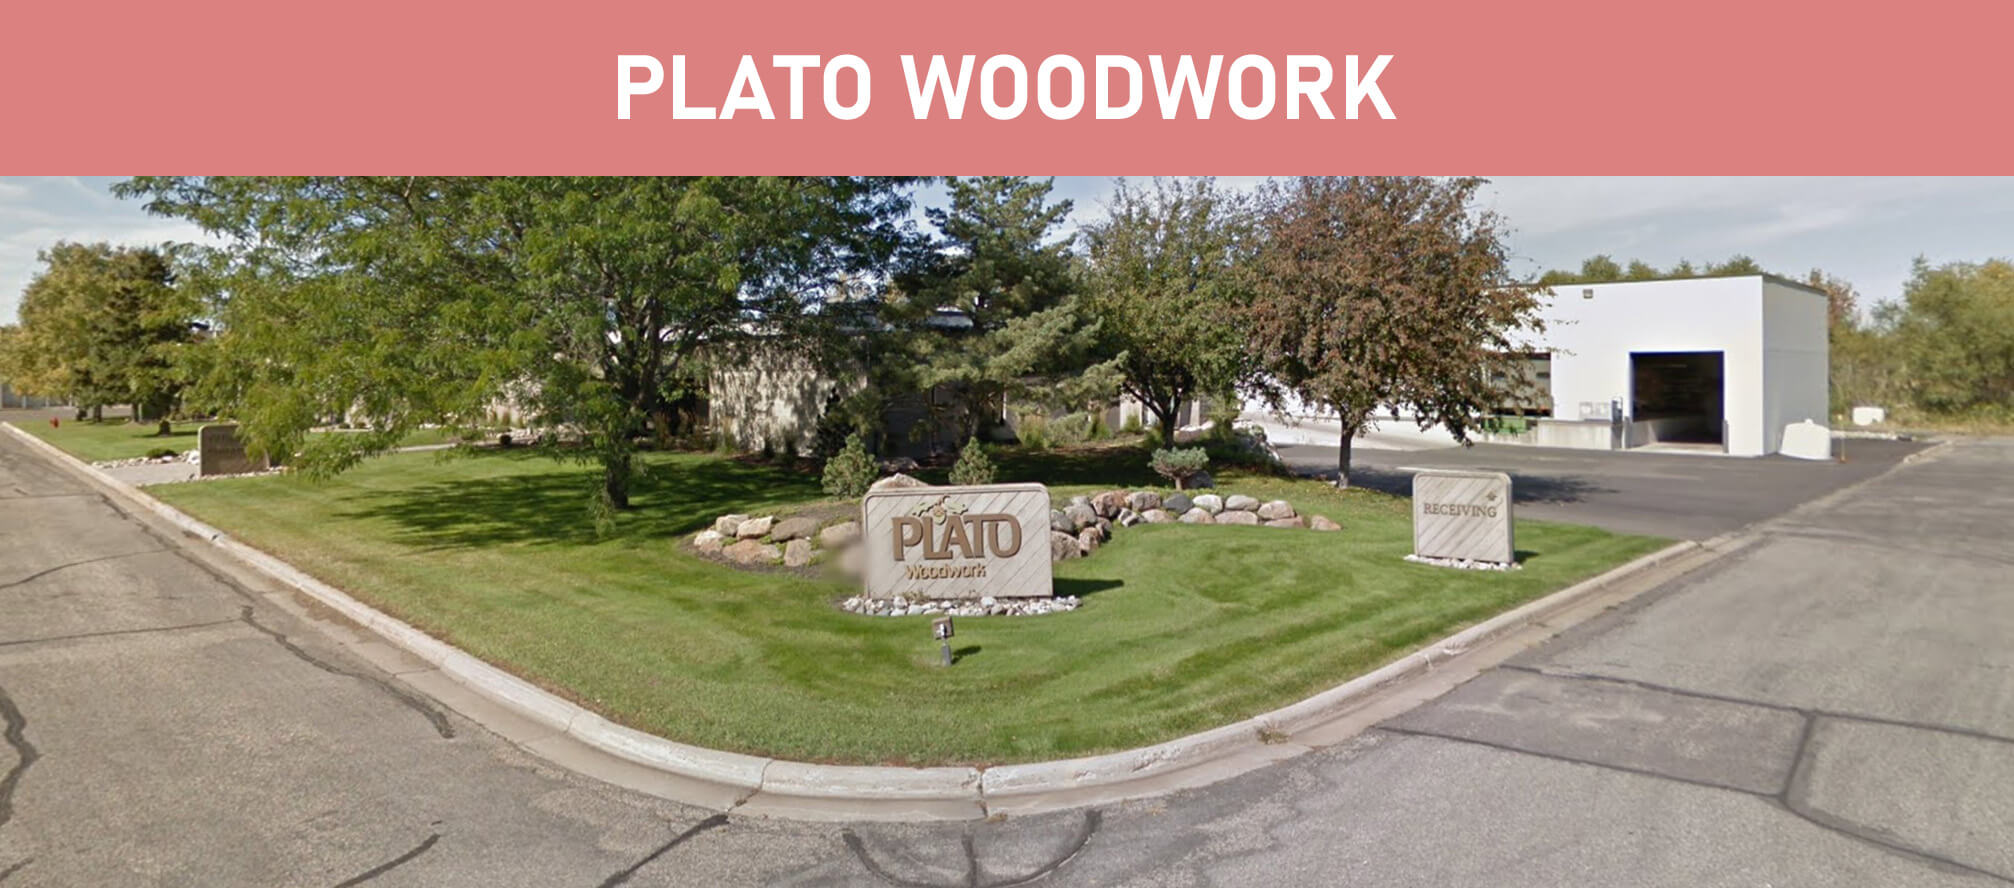 Plato Woodwork Kitchen Cabinetry Review